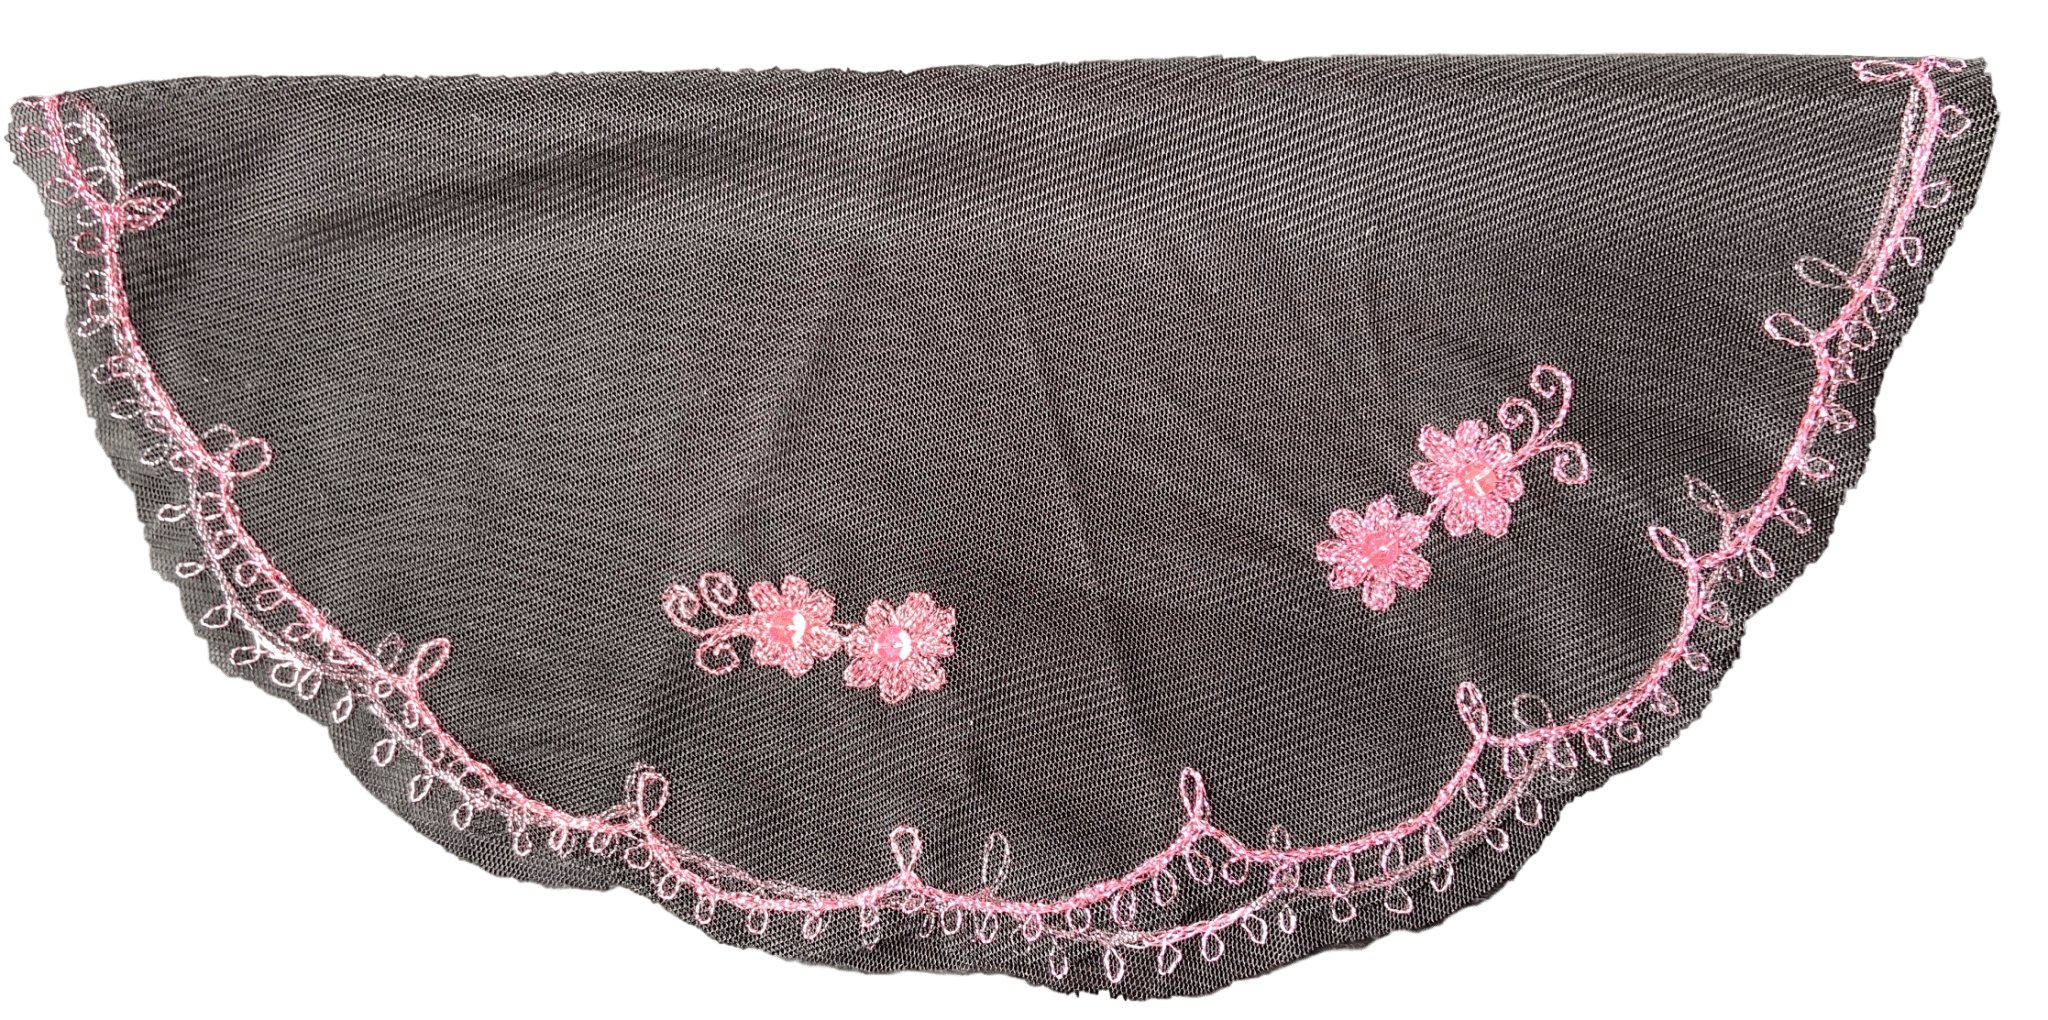 Sacrament Lace Veil Mass Head Coverings Mantilla Handcrafted Round Shape Black Detailing Pink - Ysleta Mission Gift Shop- VOTED El Paso's Best Gift Shop